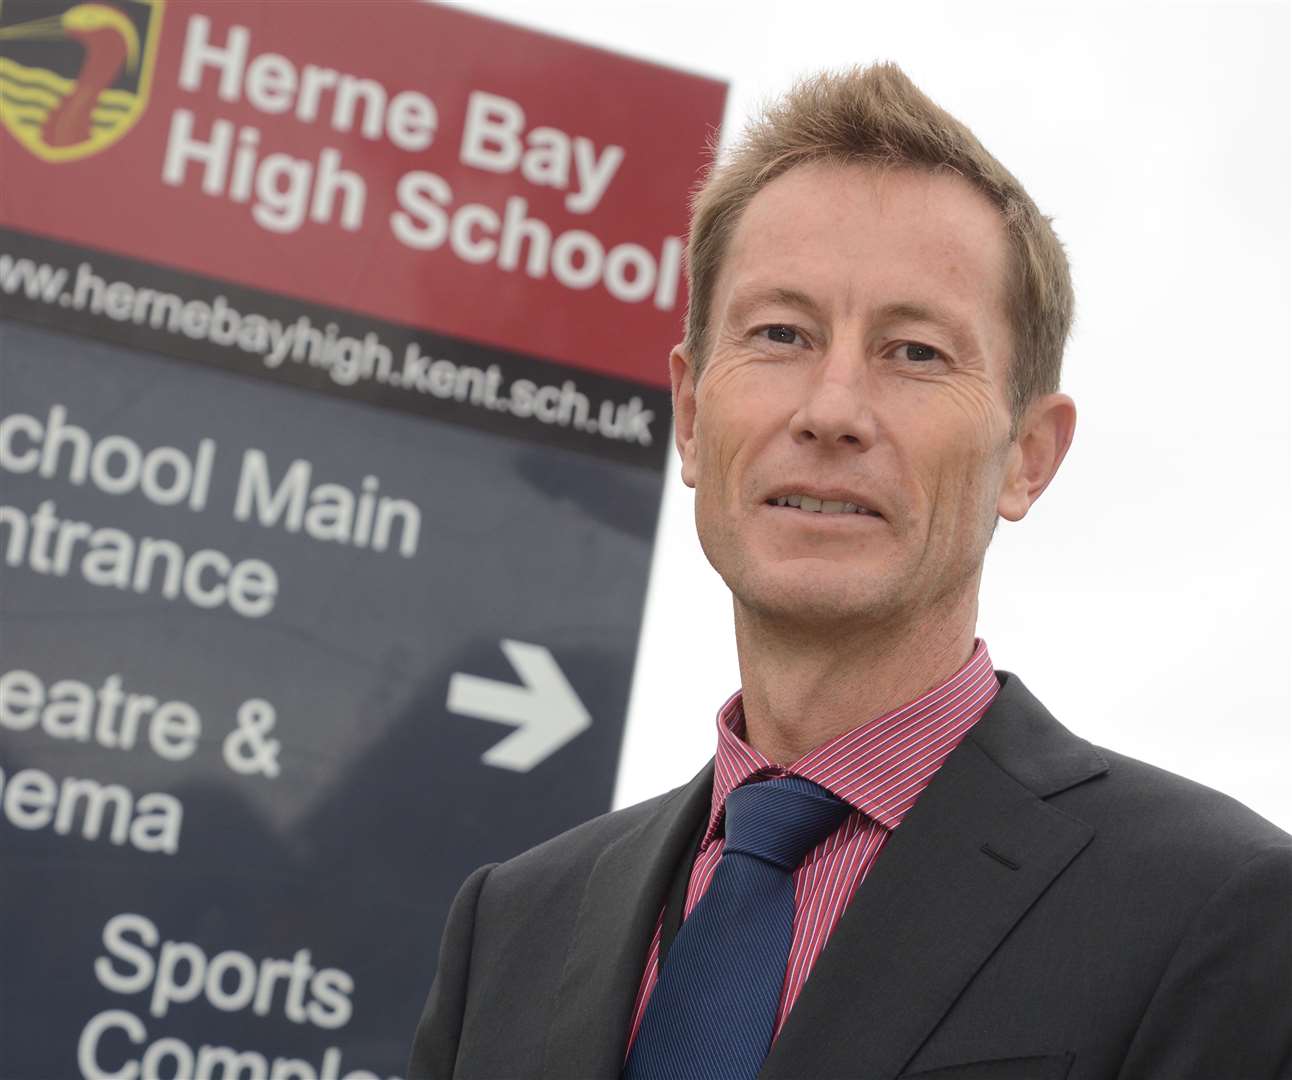 Herne Bay High principal Jon Boyes says as many as 85 pupils are currently missing classes